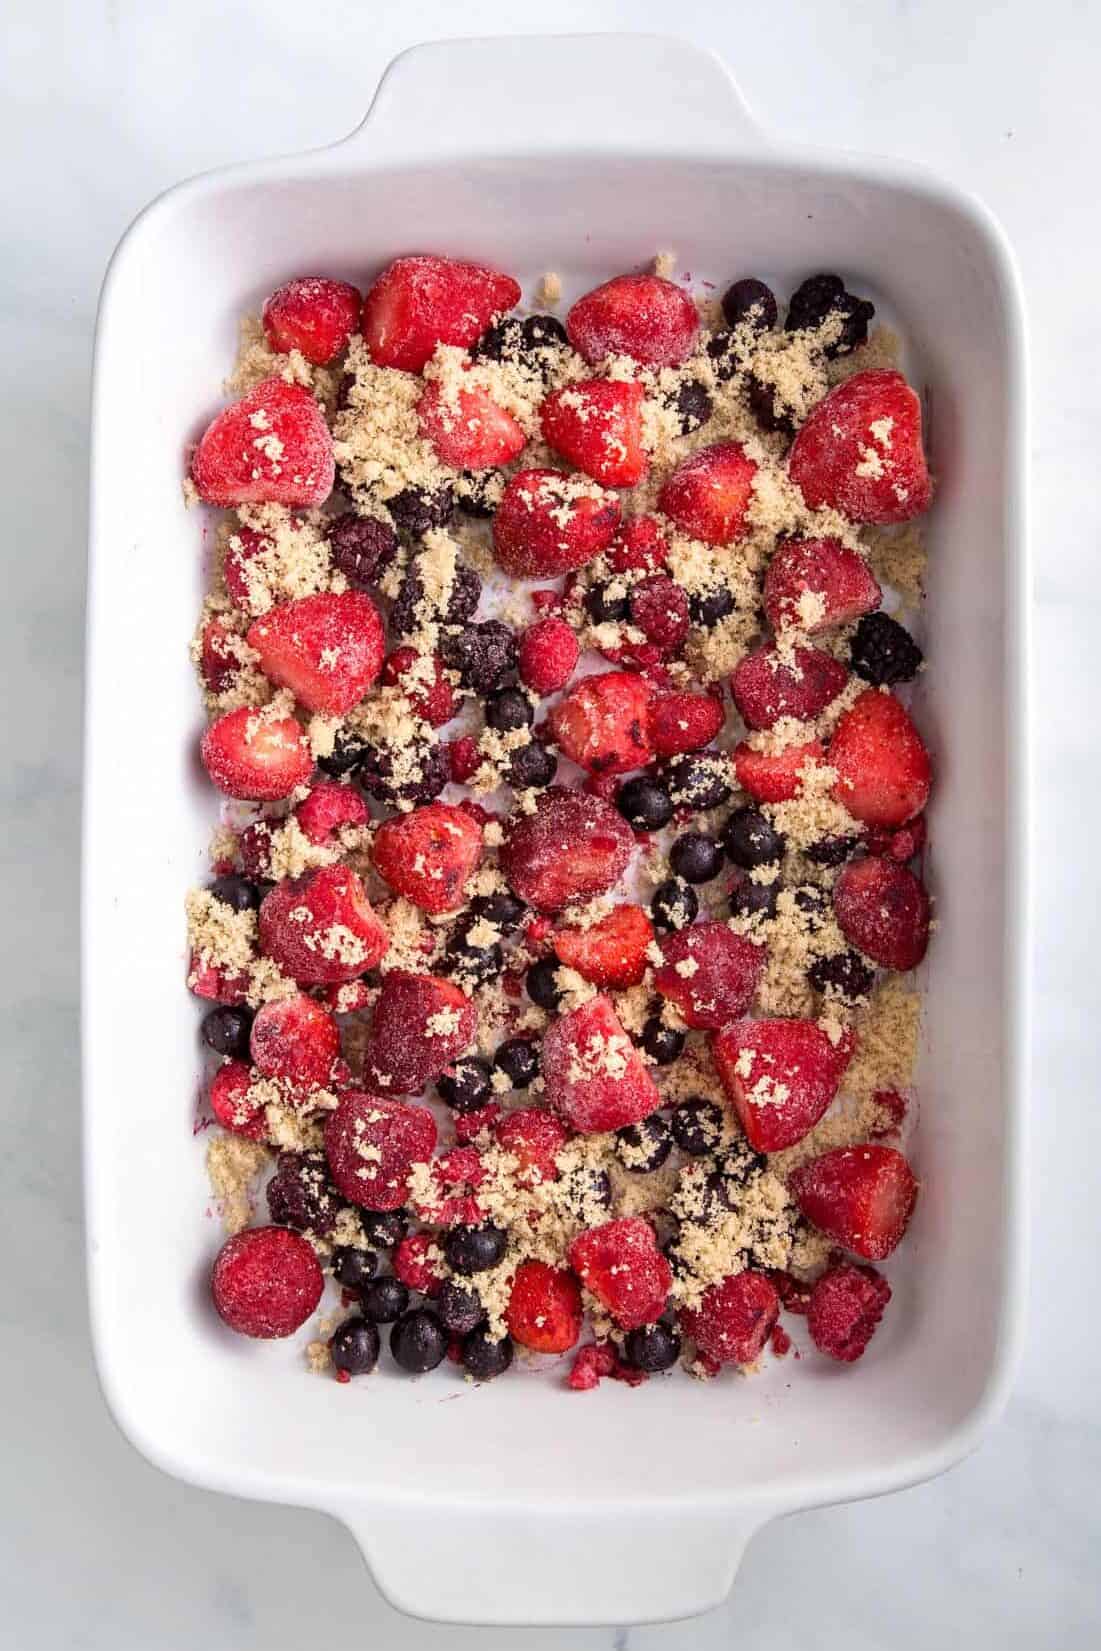 9x13 casserole dish with frozen berries spread evenly at the bottom and brown sugar sprinkled on top